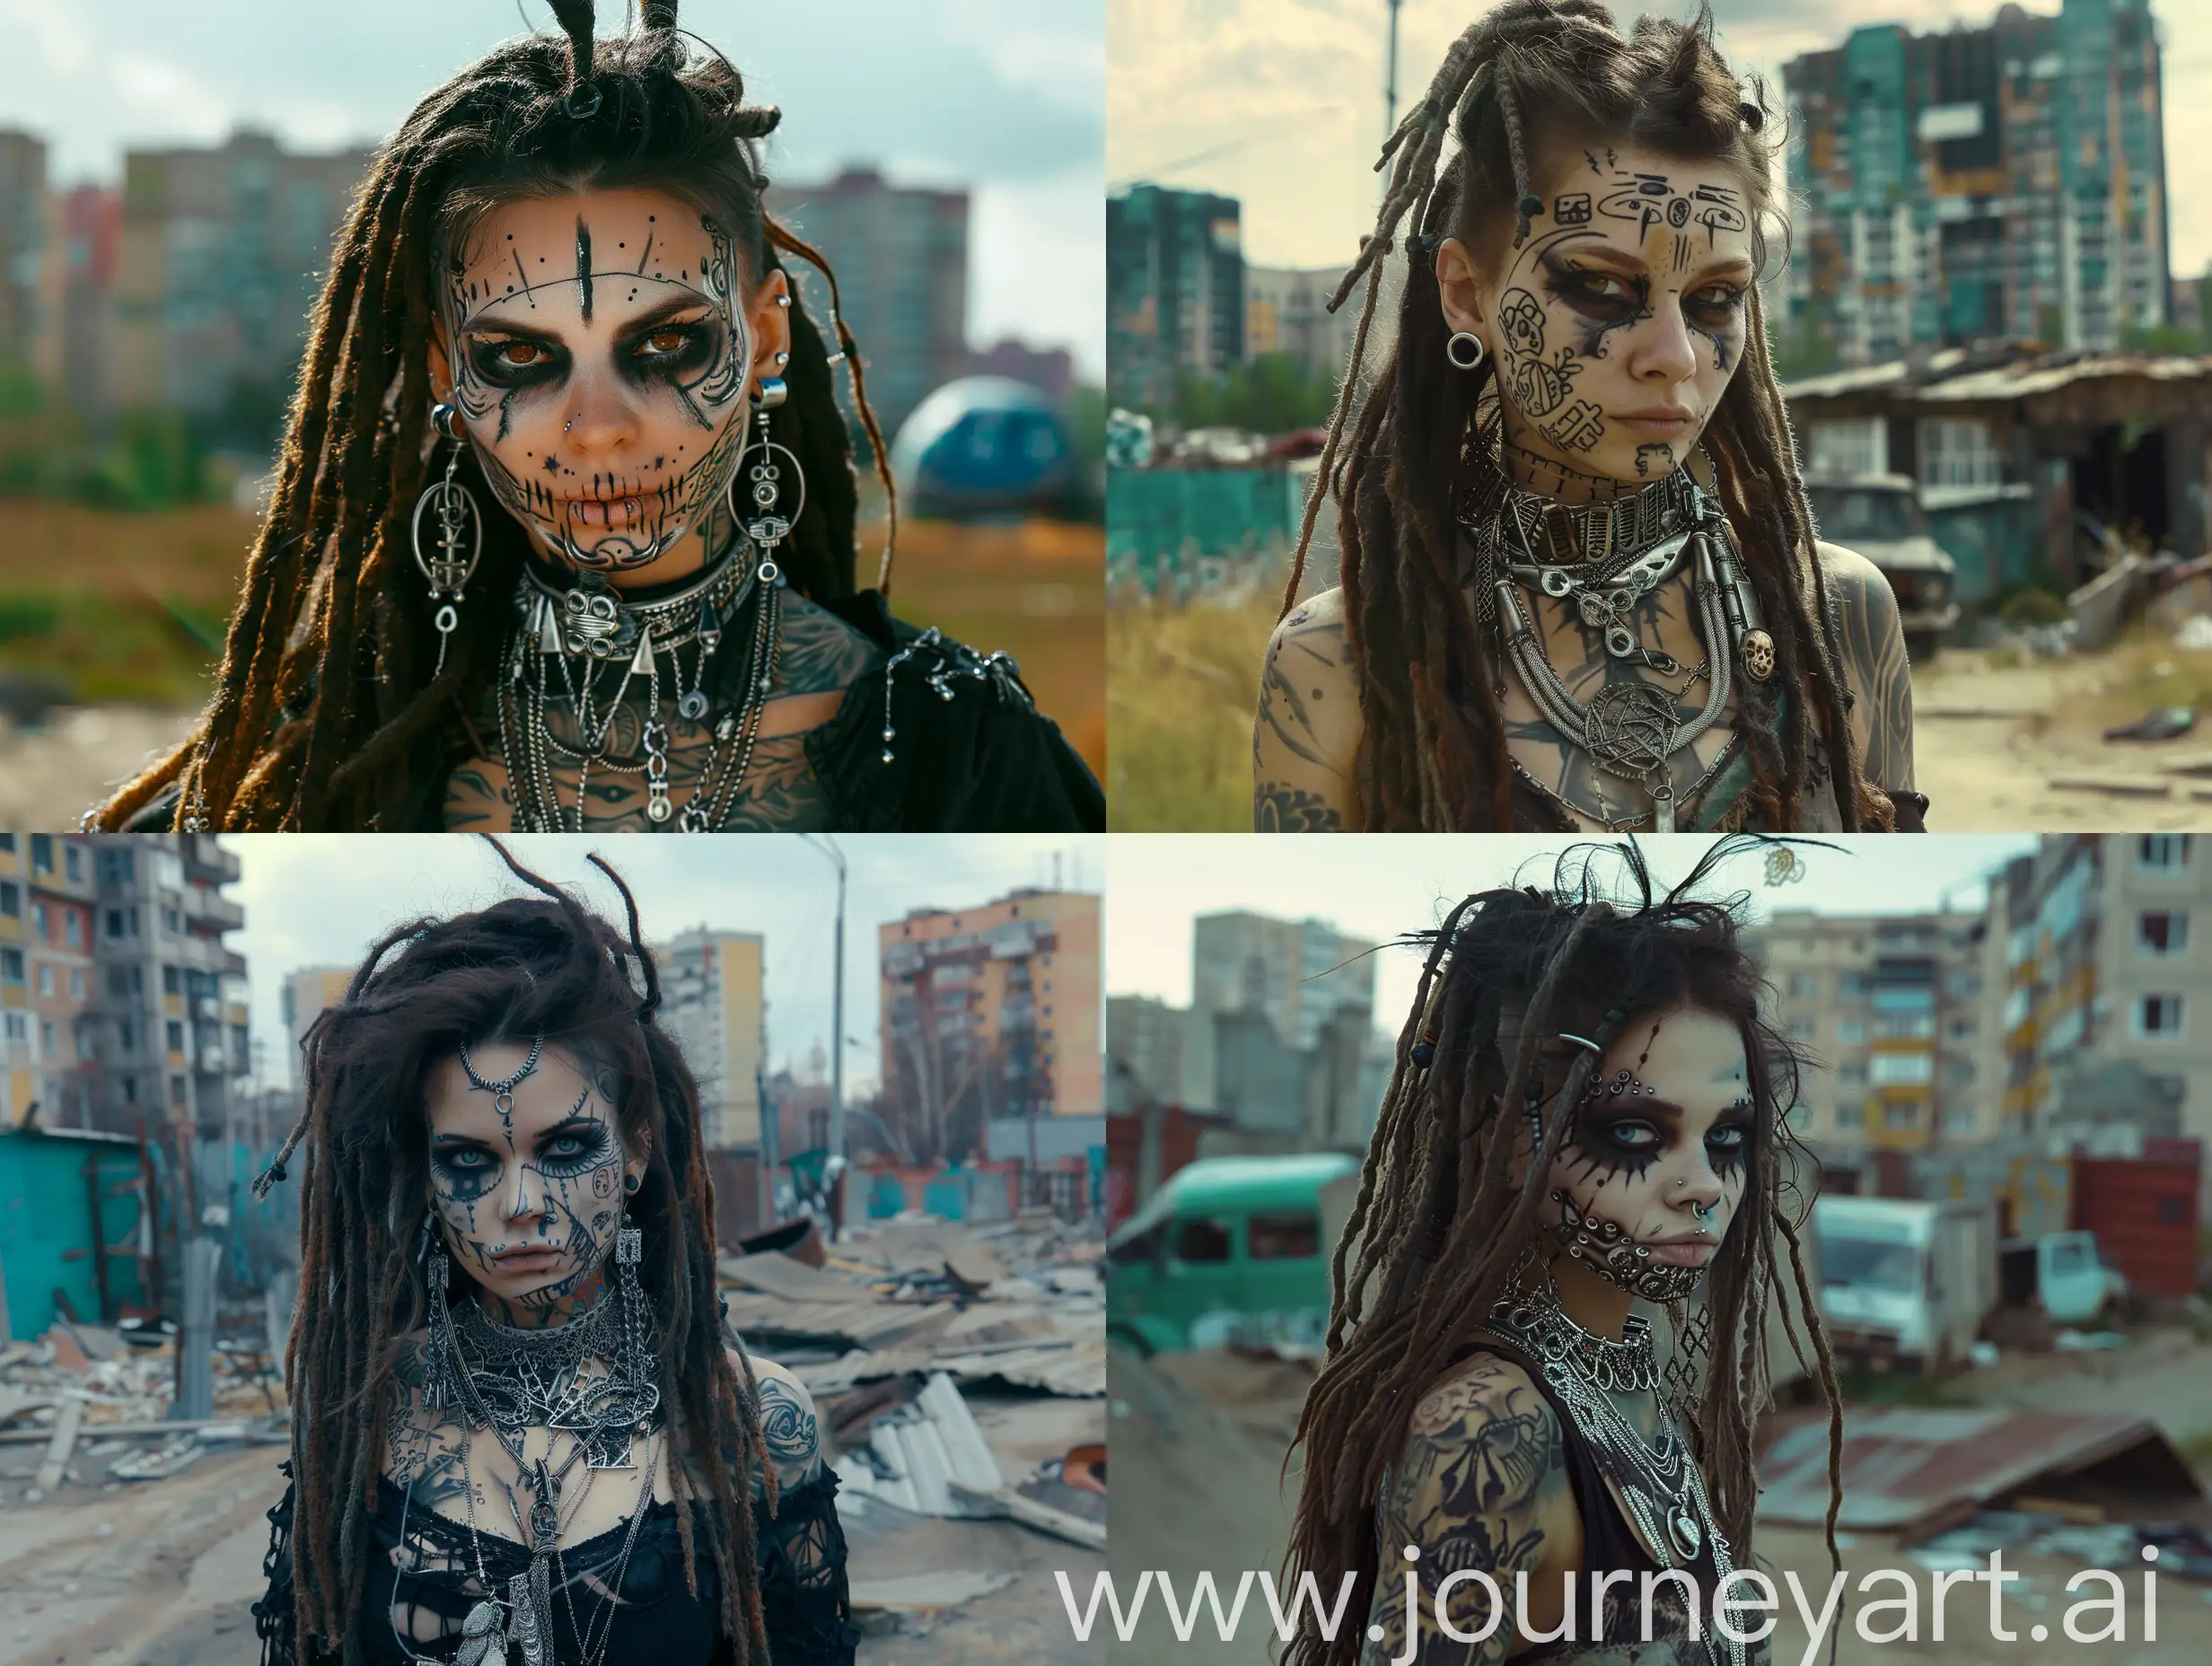 Mysterious-Young-Necromancer-with-Intricate-Tattoos-and-Silver-Jewelry-in-PostApocalyptic-Urban-Fantasy-Scene